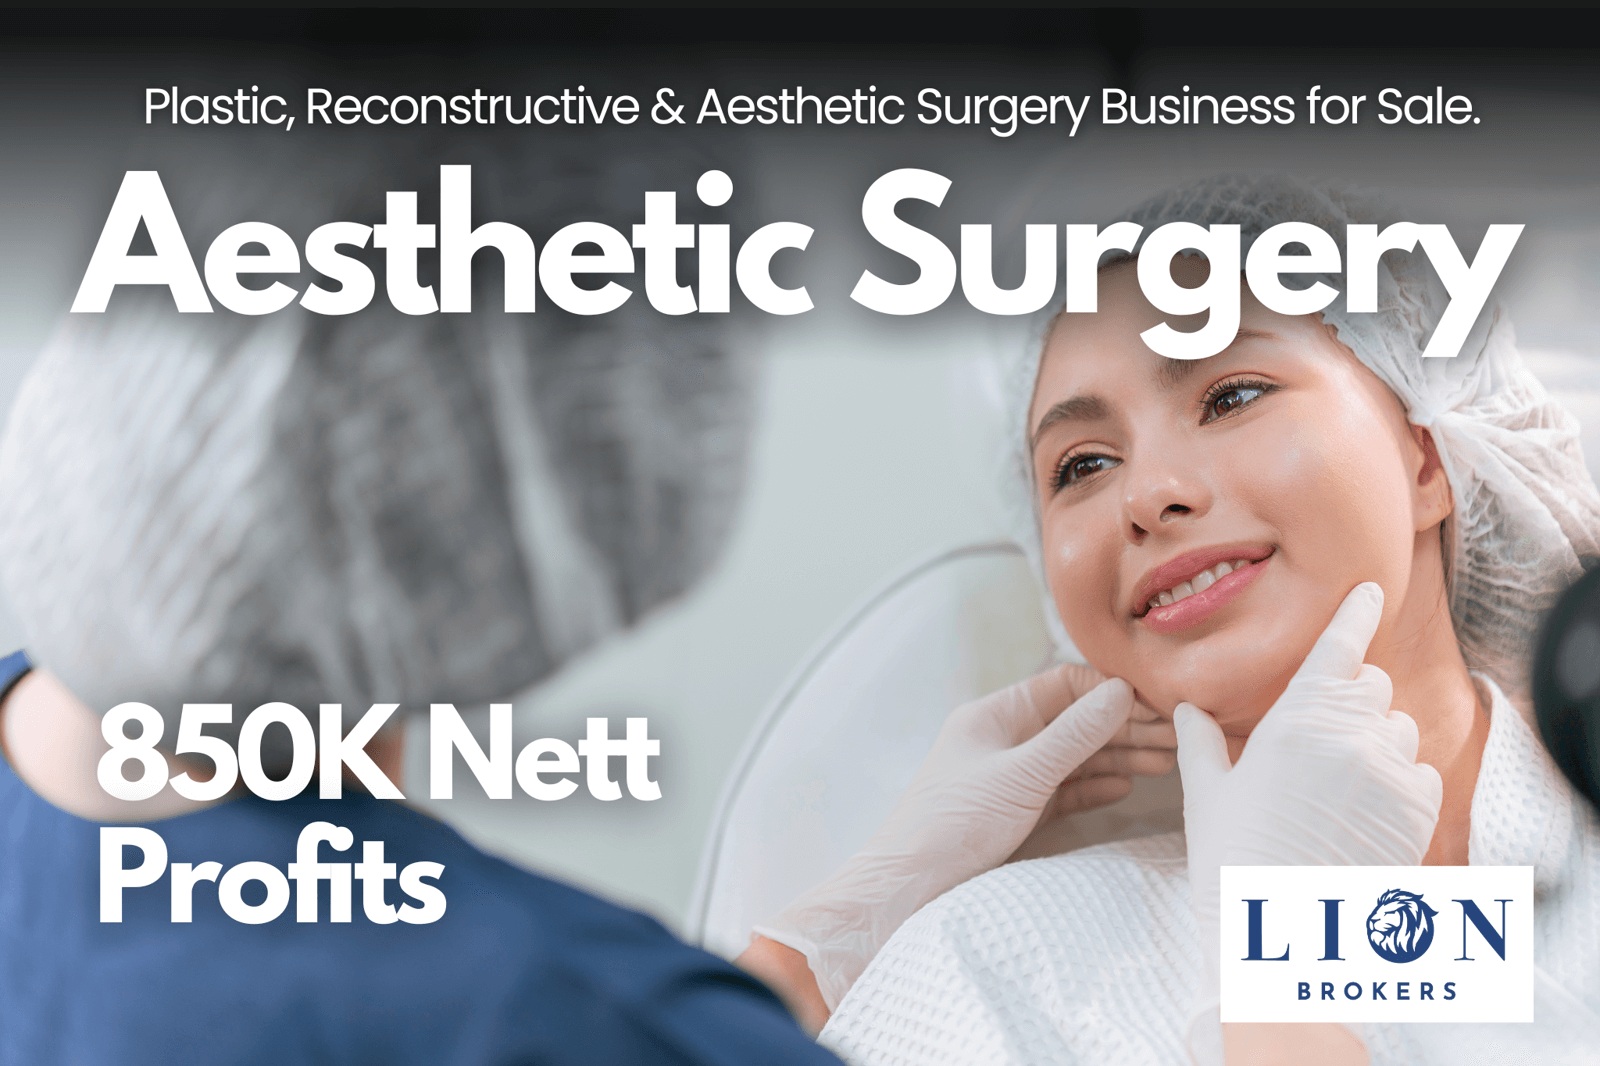 Award Winning Aesthetic Surgery Business For Sale